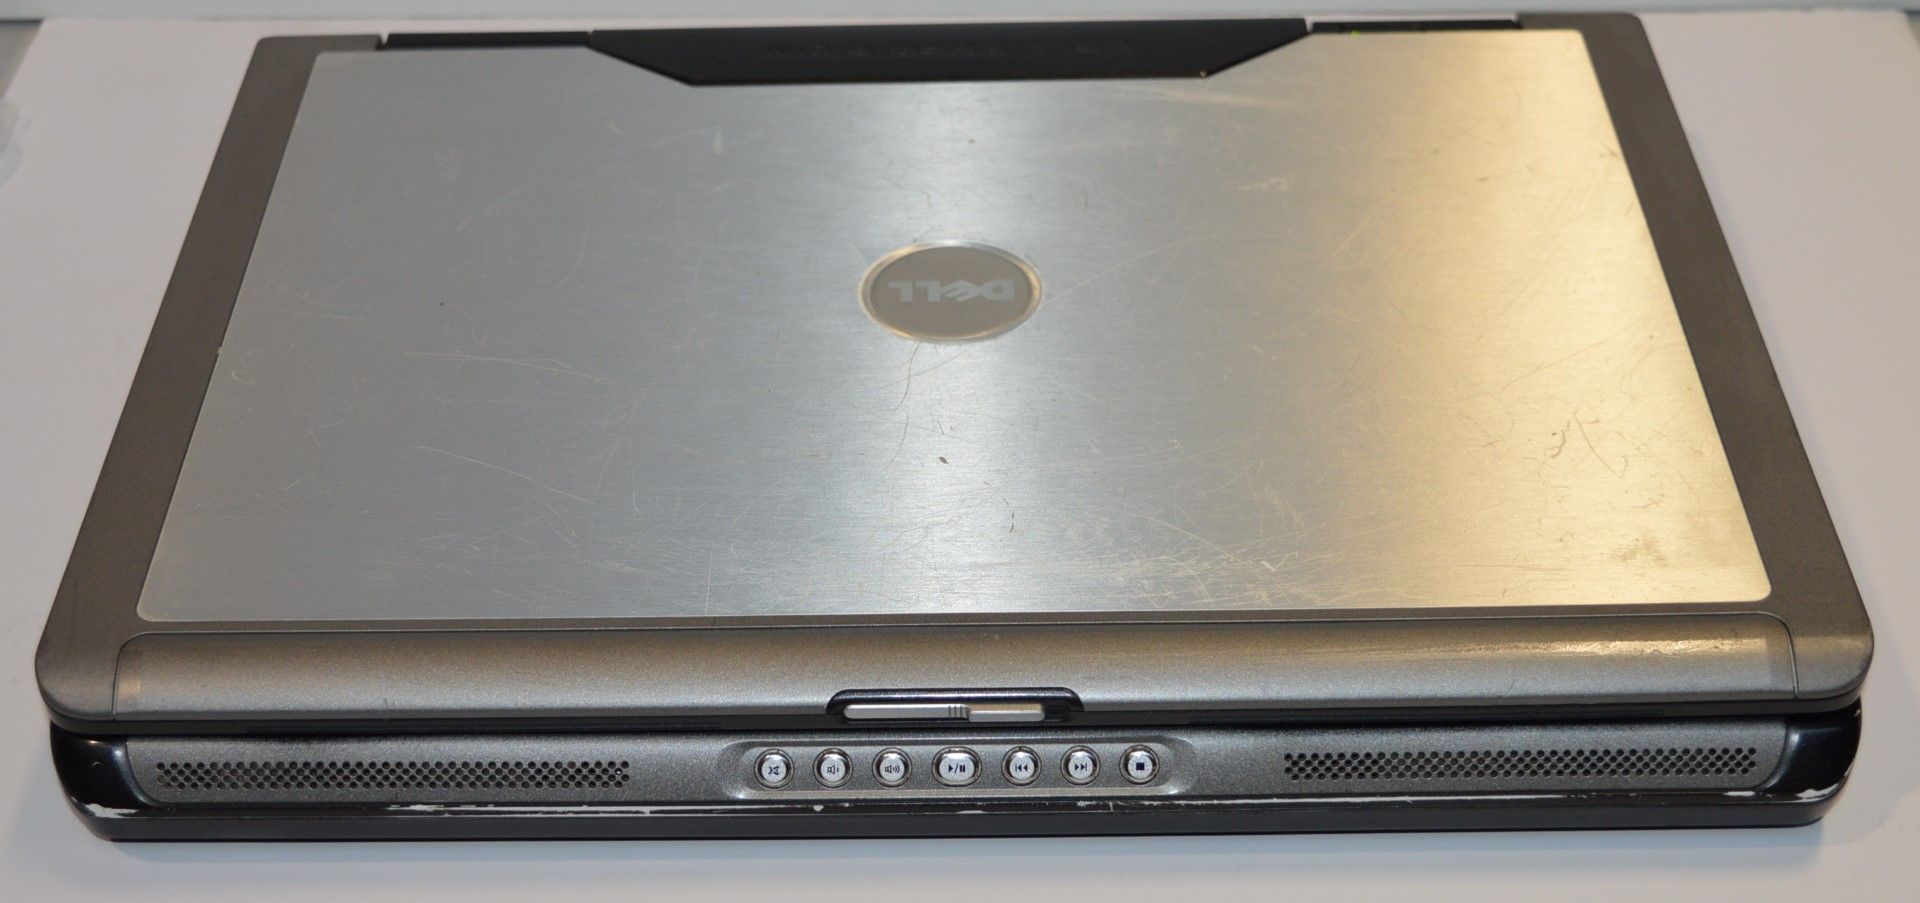 1 x Dell M90 17 Inch Laptop Computer - Features an Intel Core 2 Duo 2.16ghz Processor, 160gb Hard - Image 11 of 12